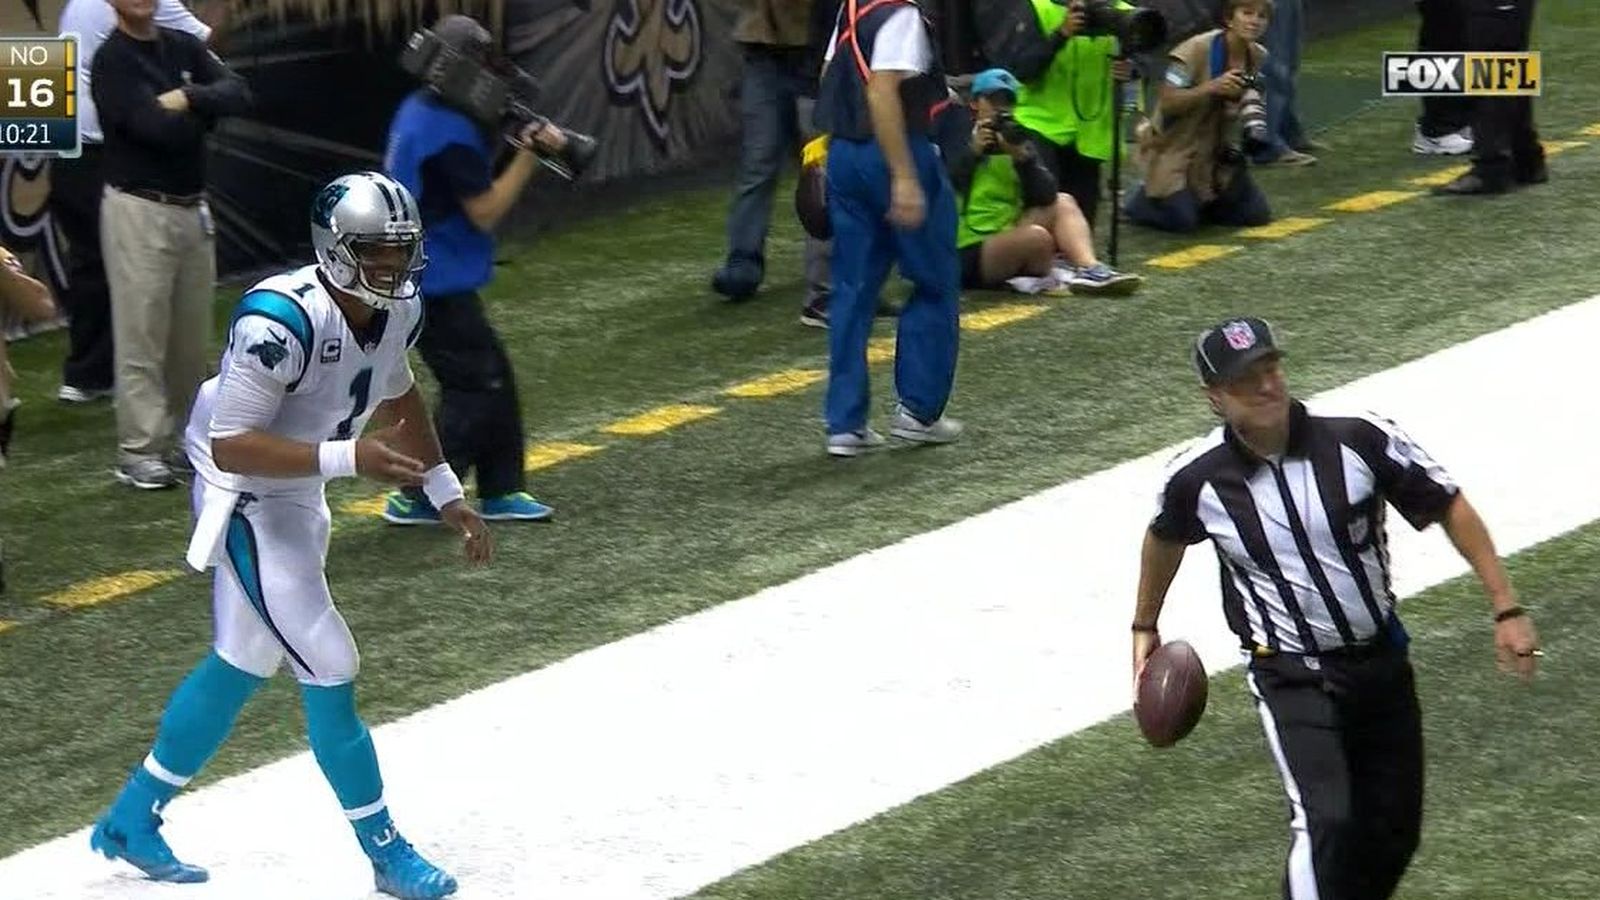 Ref tries to stop Cam Newton from giving TD ball to a fan